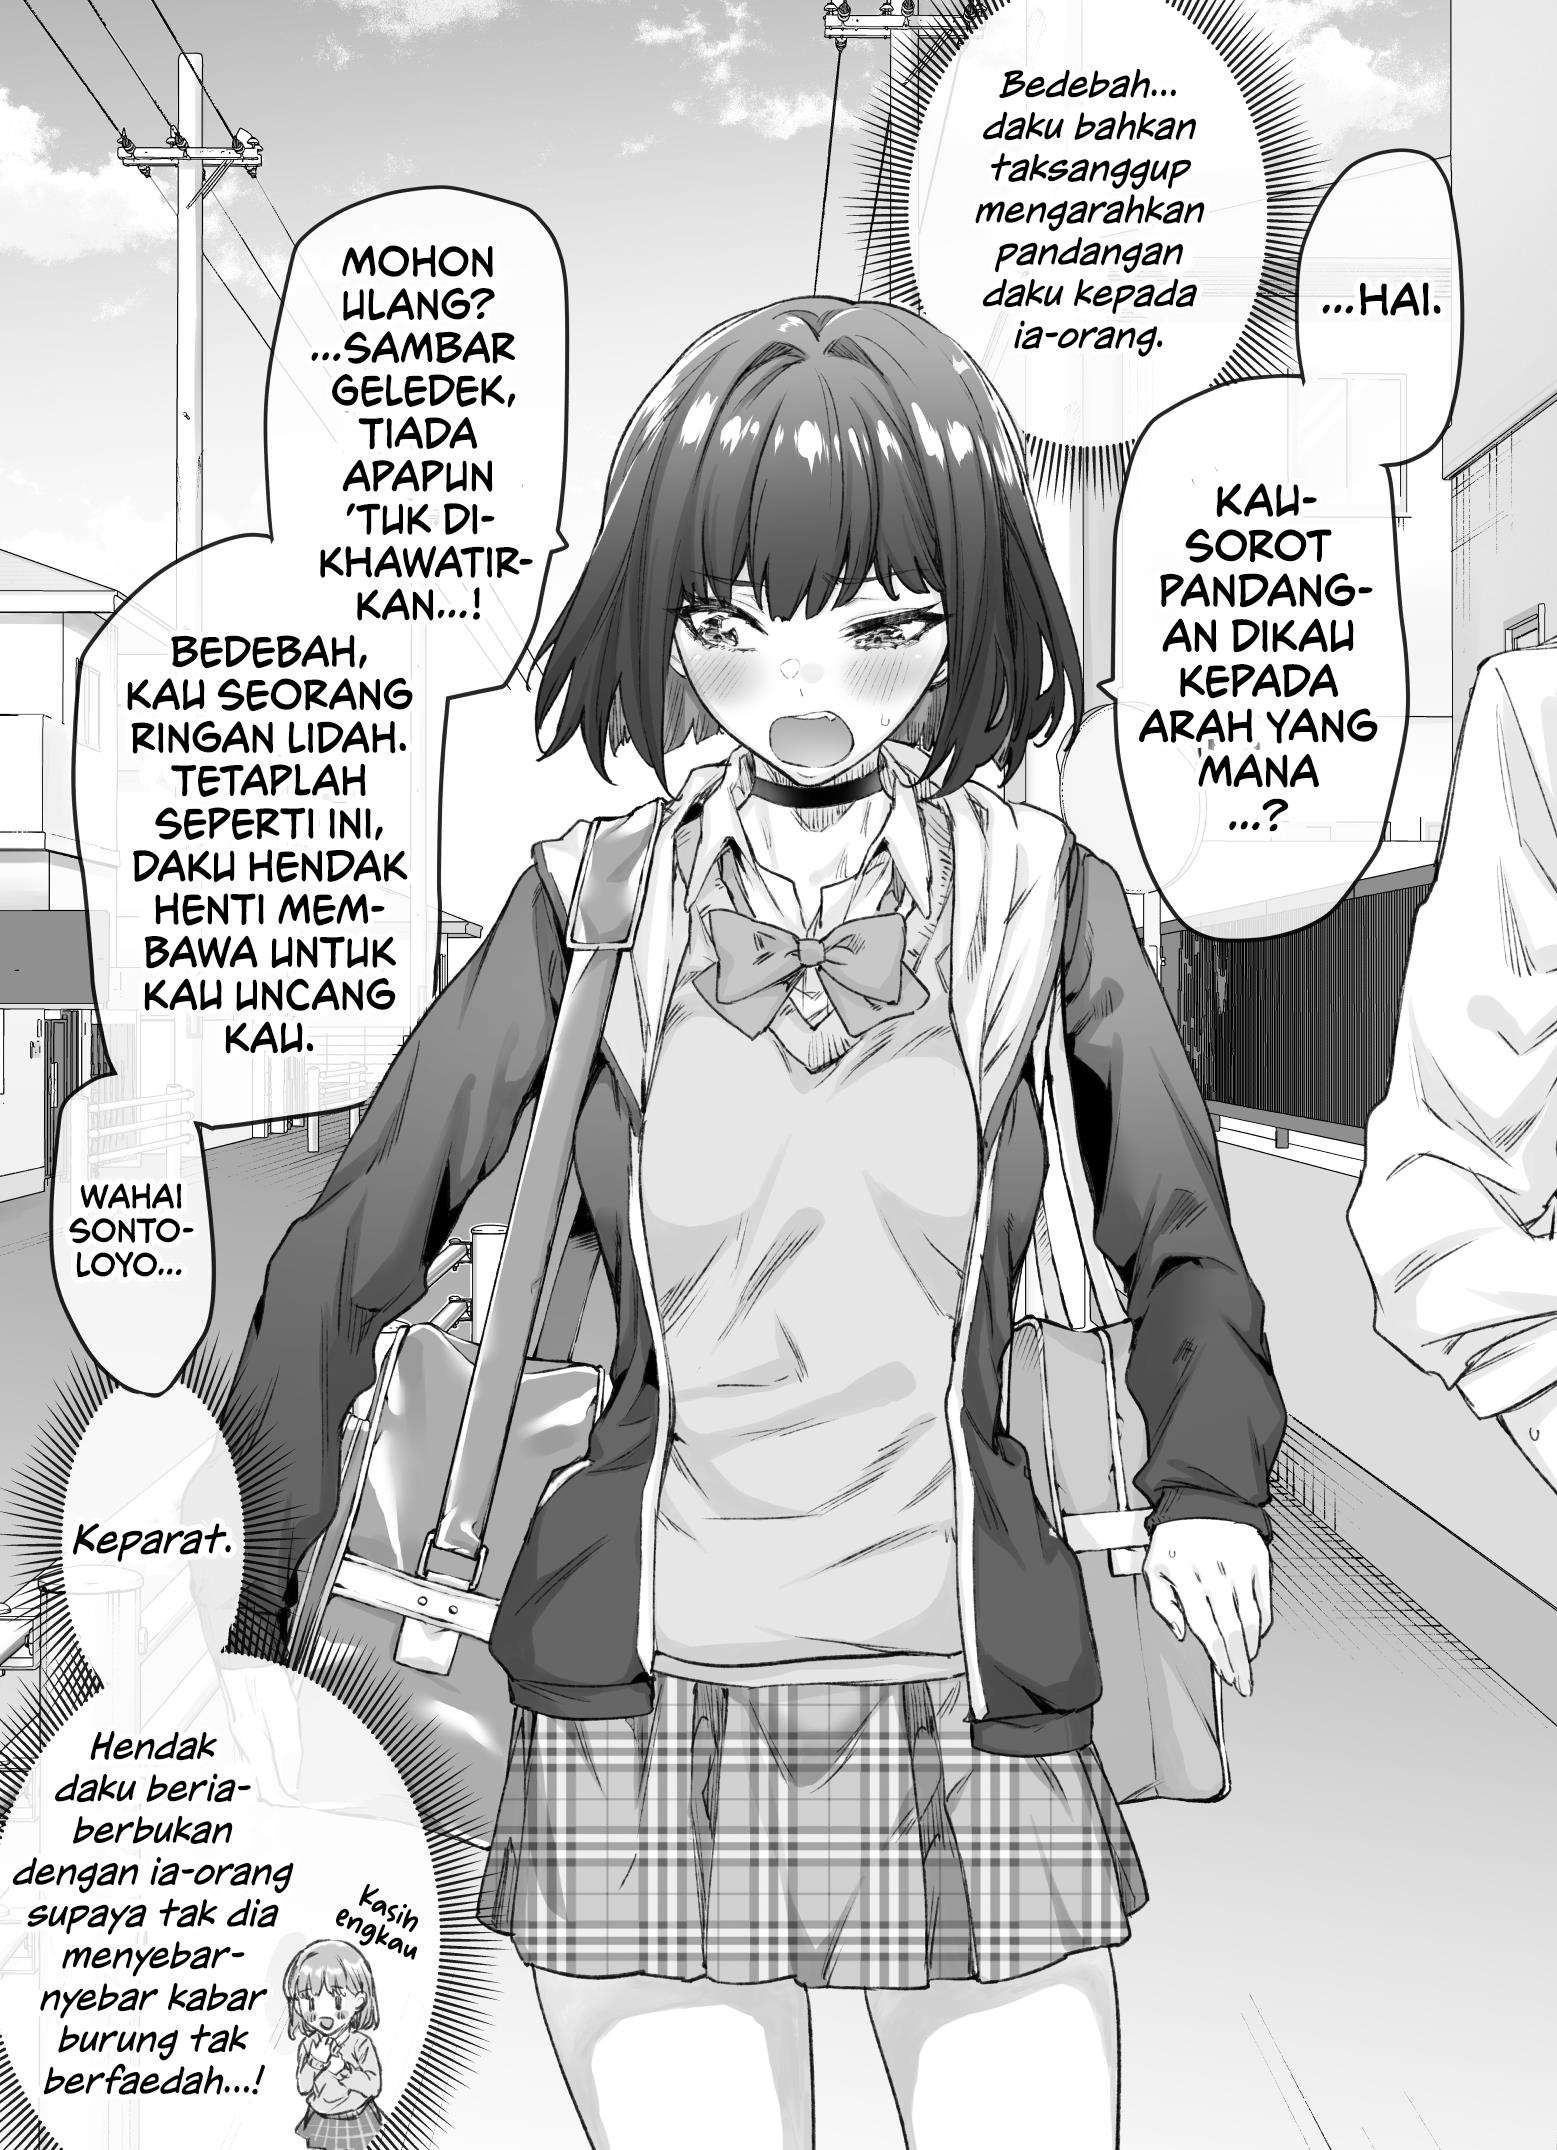 The Tsuntsuntsuntsuntsuntsun tsuntsuntsuntsuntsundere Girl Getting Less and Less Tsun Day by Day Chapter 15.1